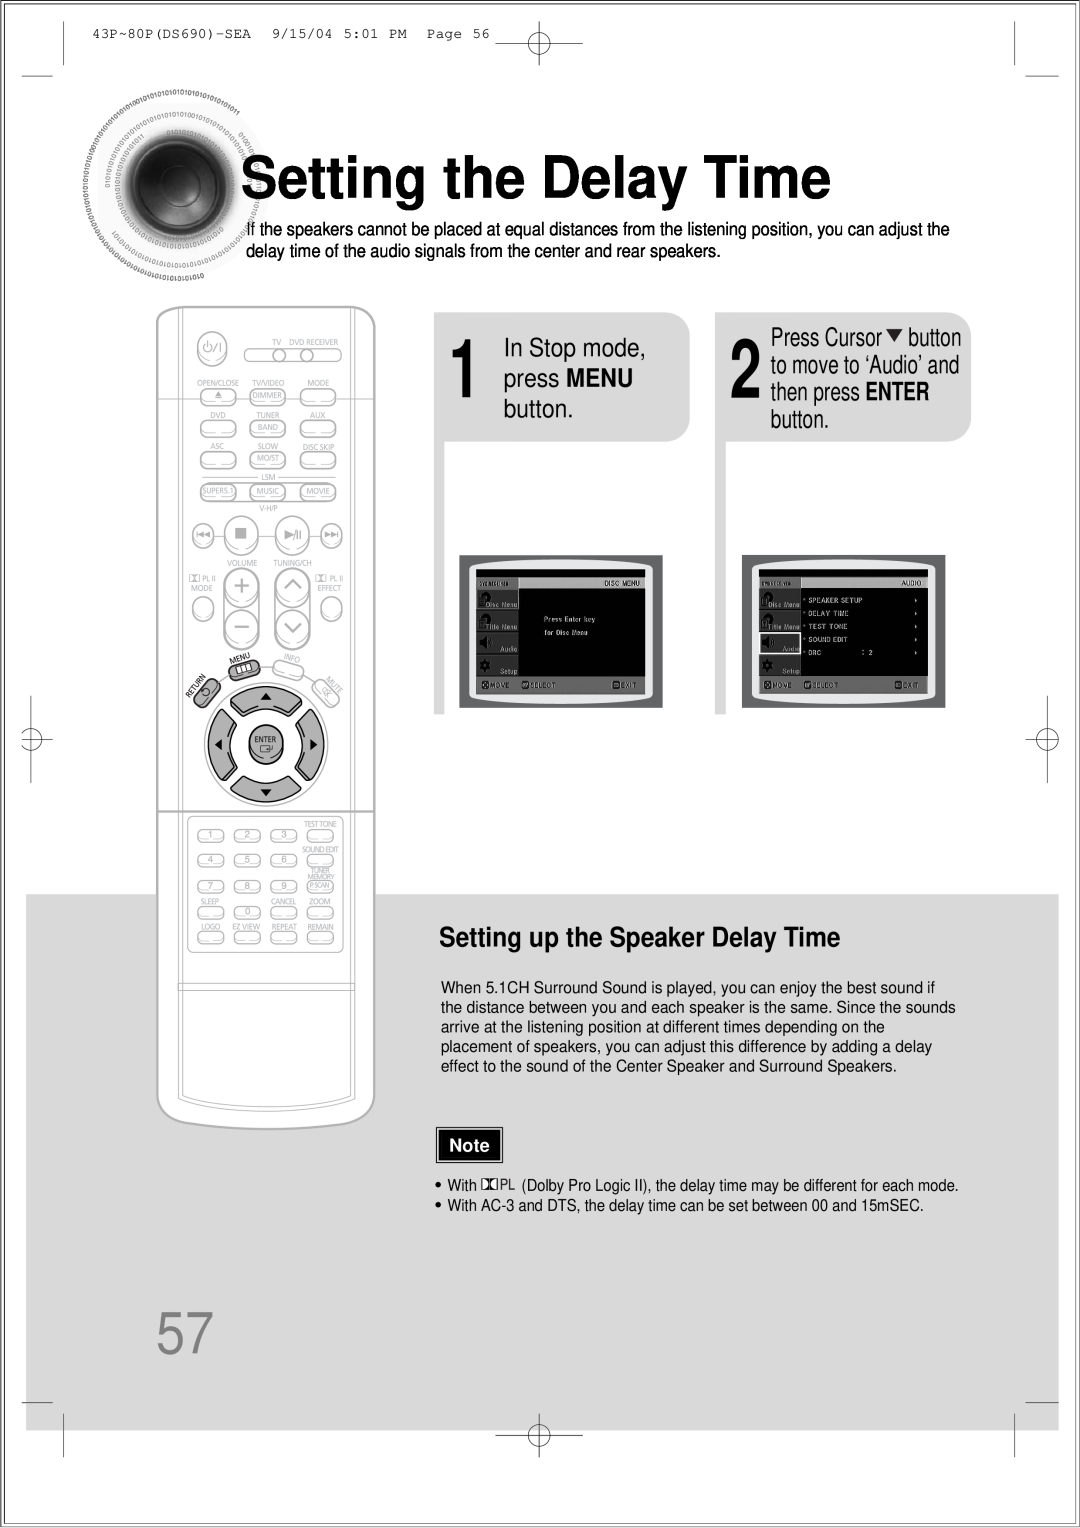 Samsung HT-DS690 Settingthe Delay Time, Setting up the Speaker Delay Time, In Stop mode, Press Cursor button 